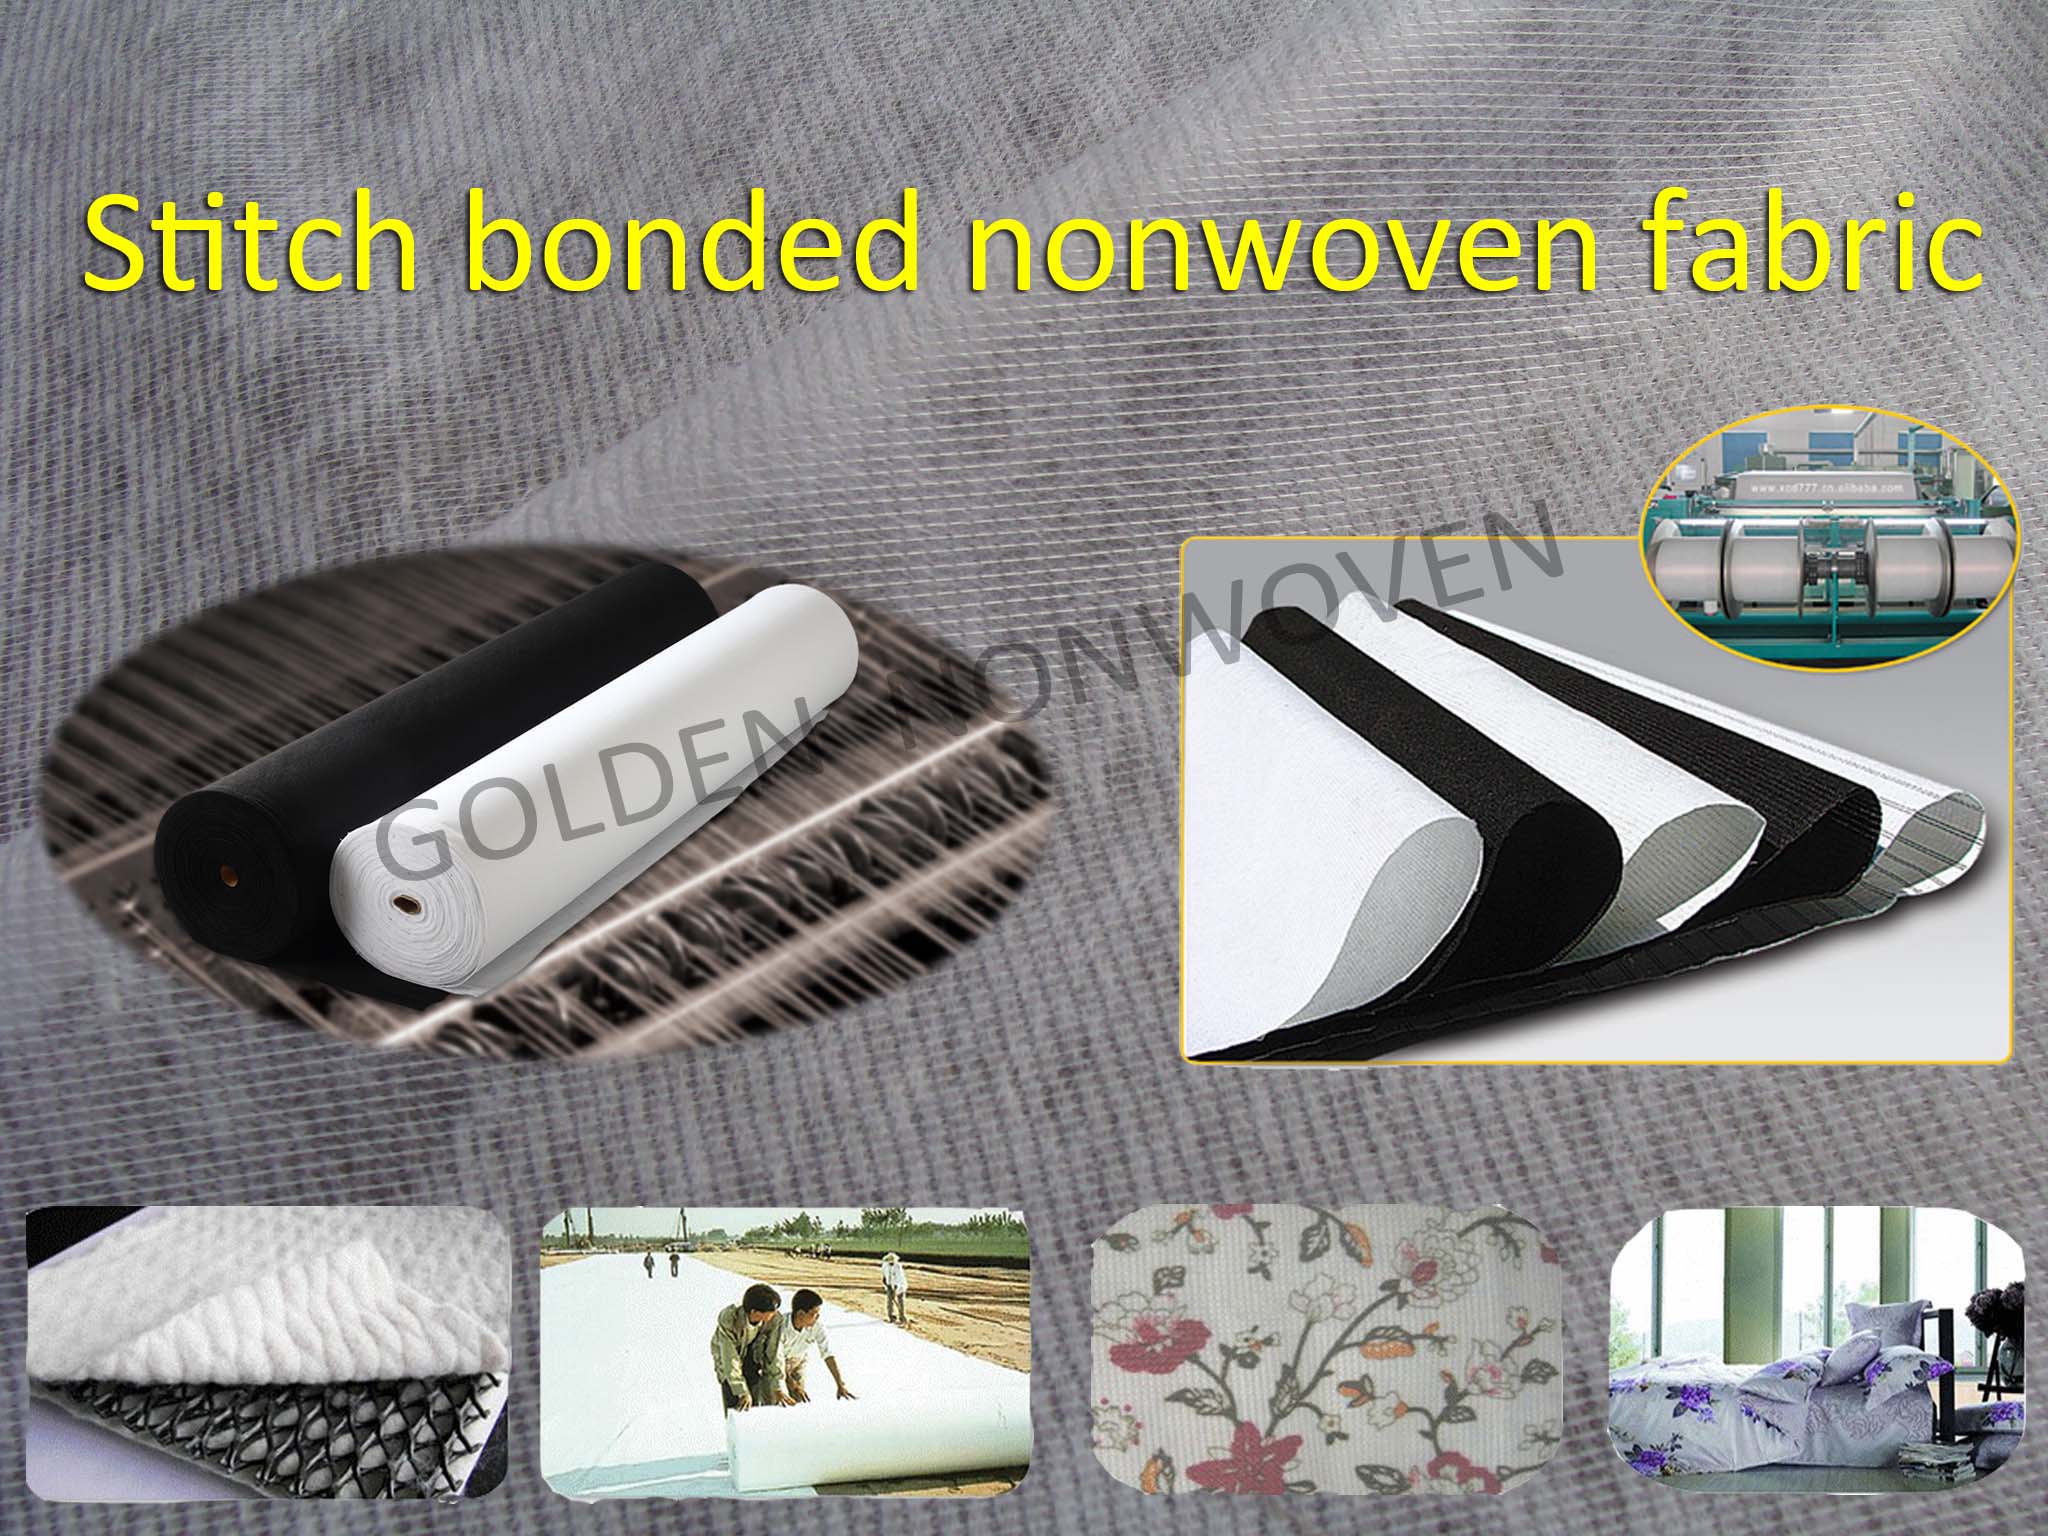 The features and applications of stitch bonded non woven fabric